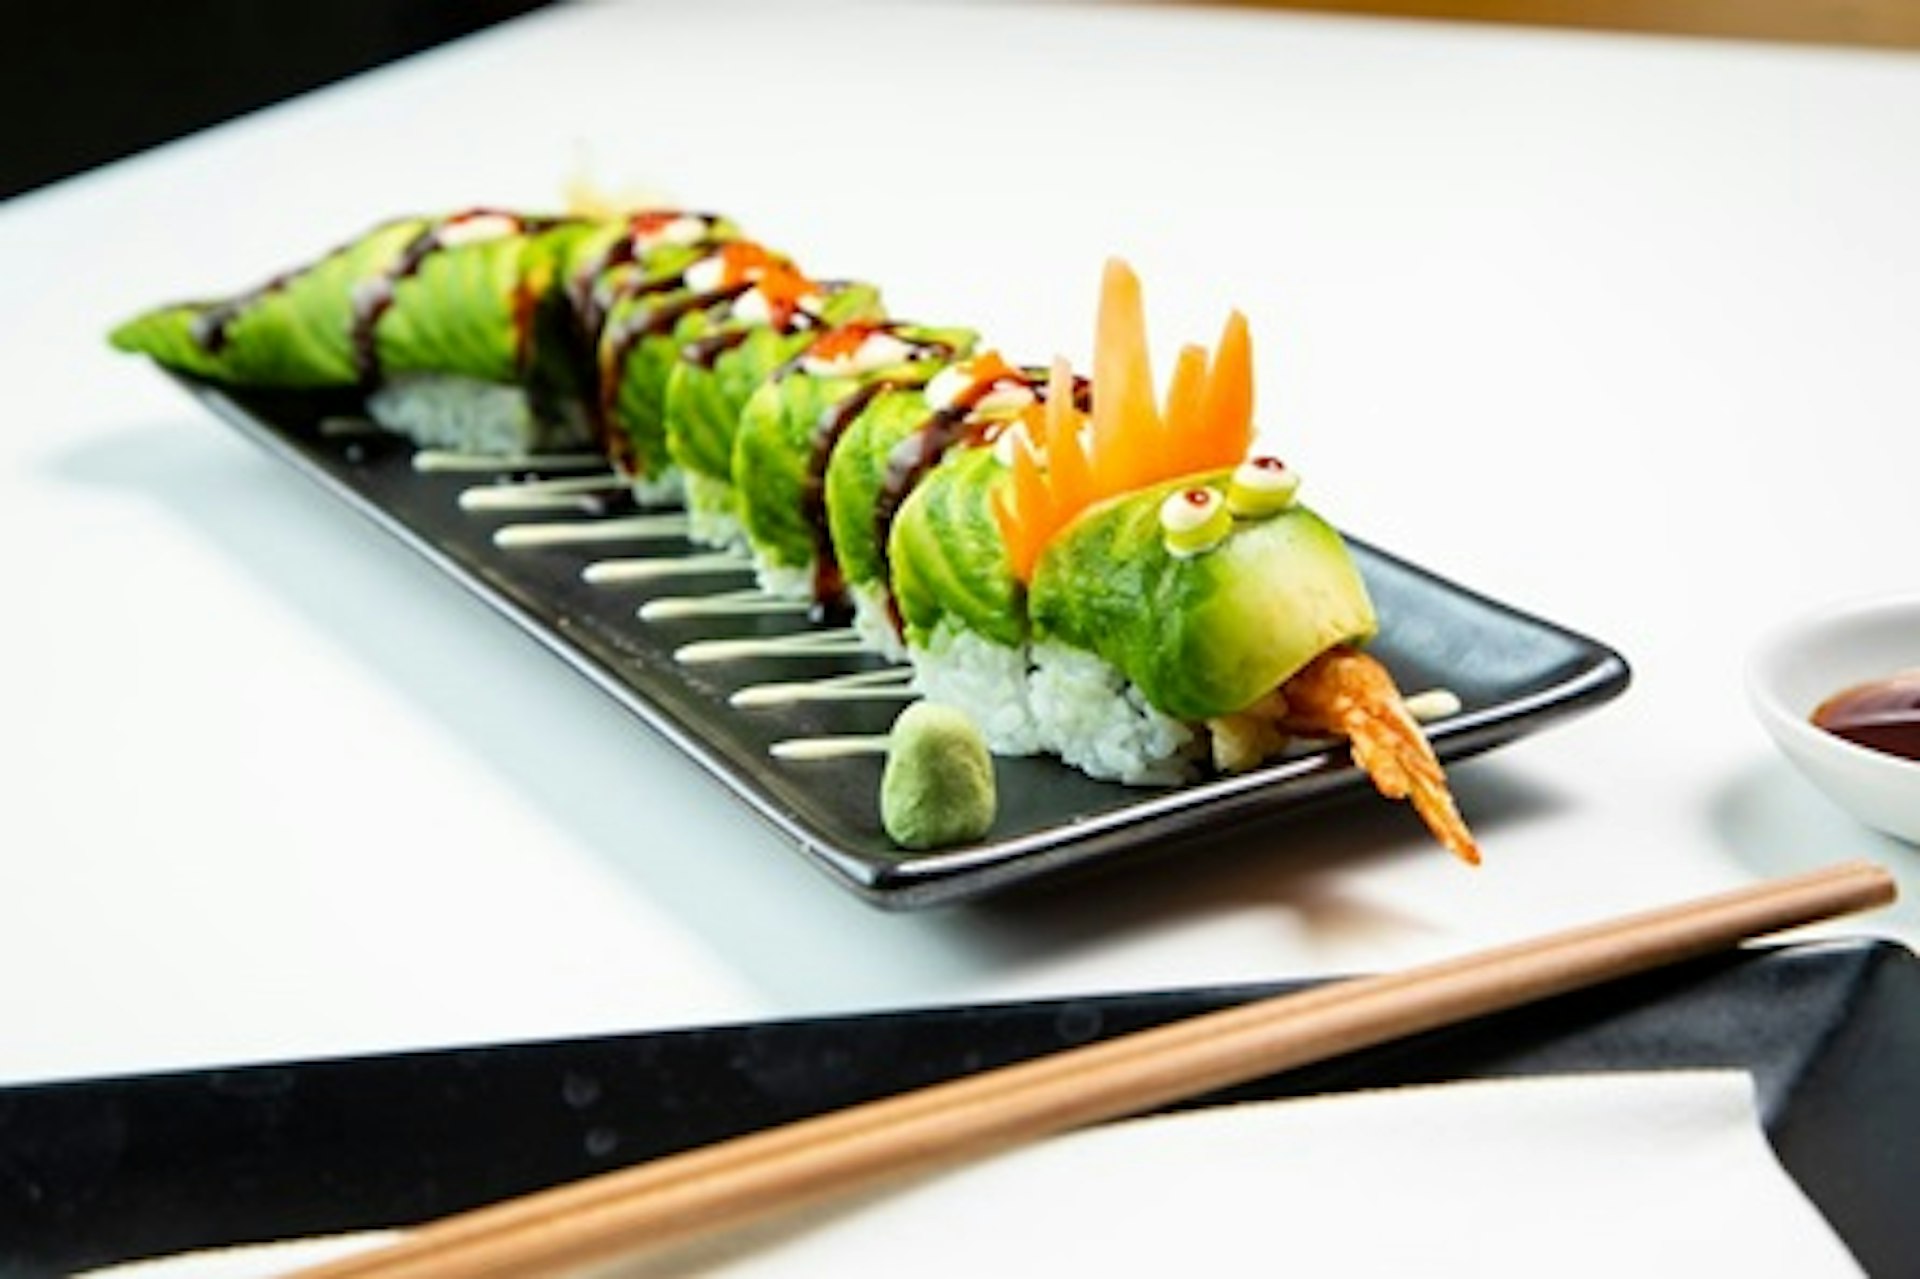 Create Your Own Sushi Dragon with Free Flowing Brunch for Two at inamo, London 1